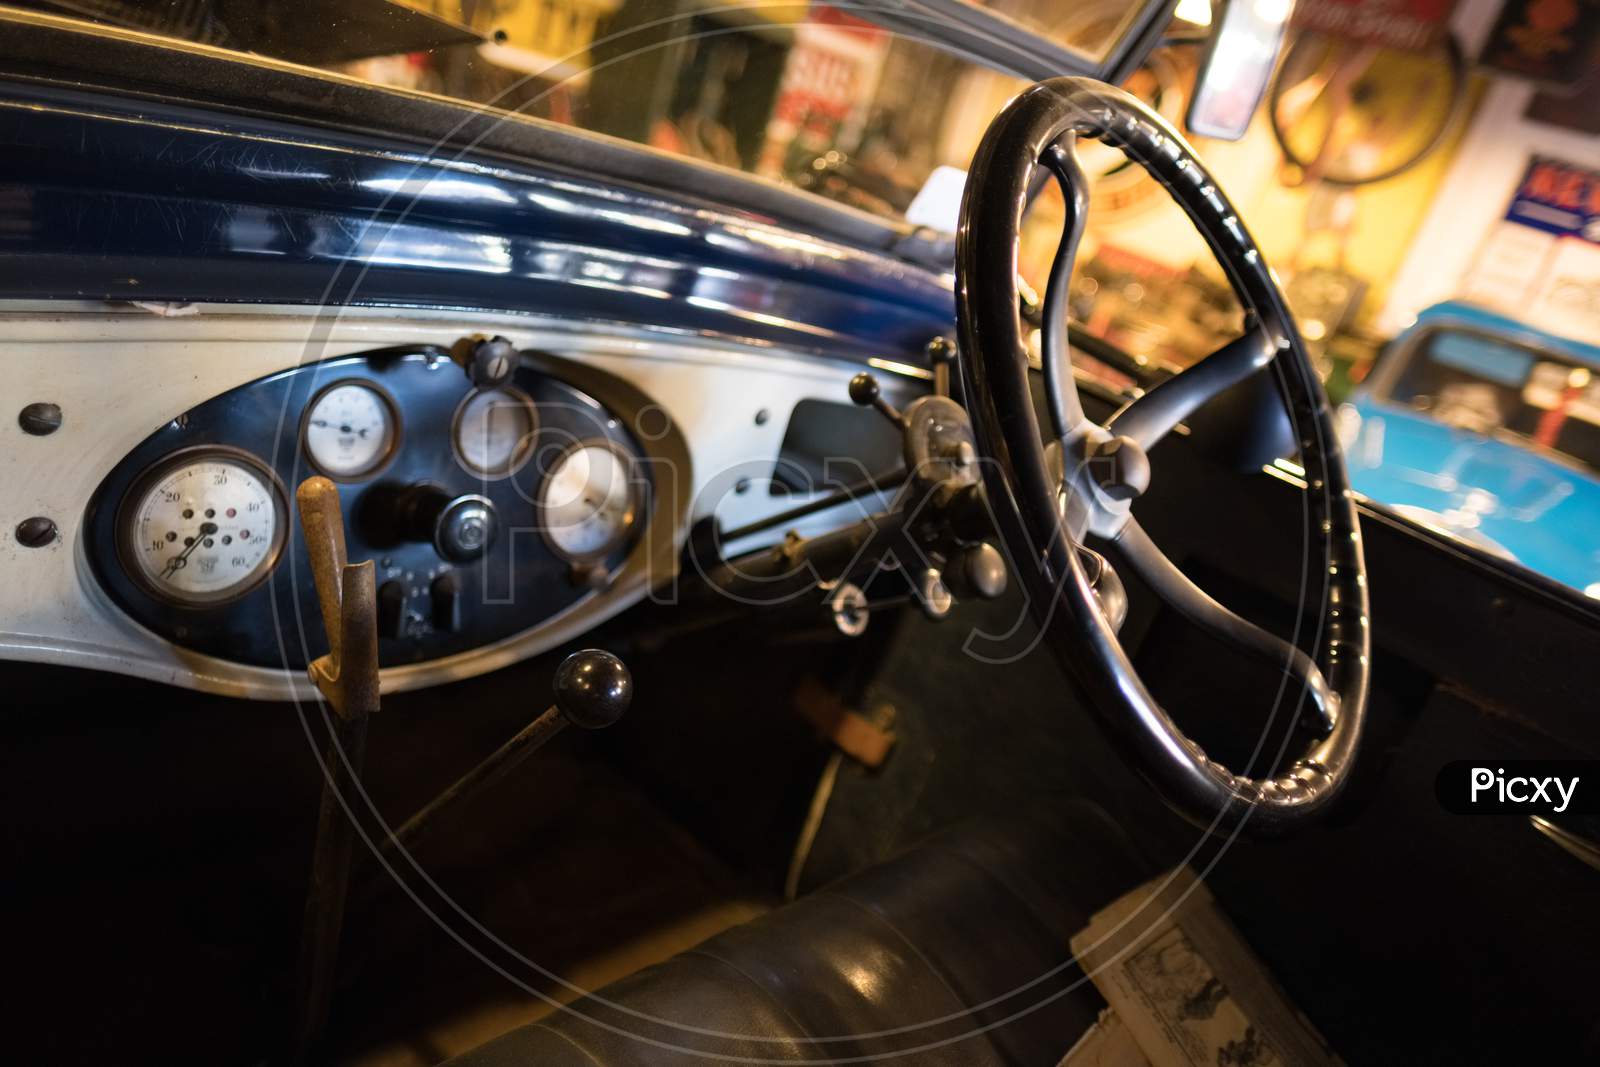 Cockpit Of An Old Car In The Motor Museum At Bourton-On-The-Water